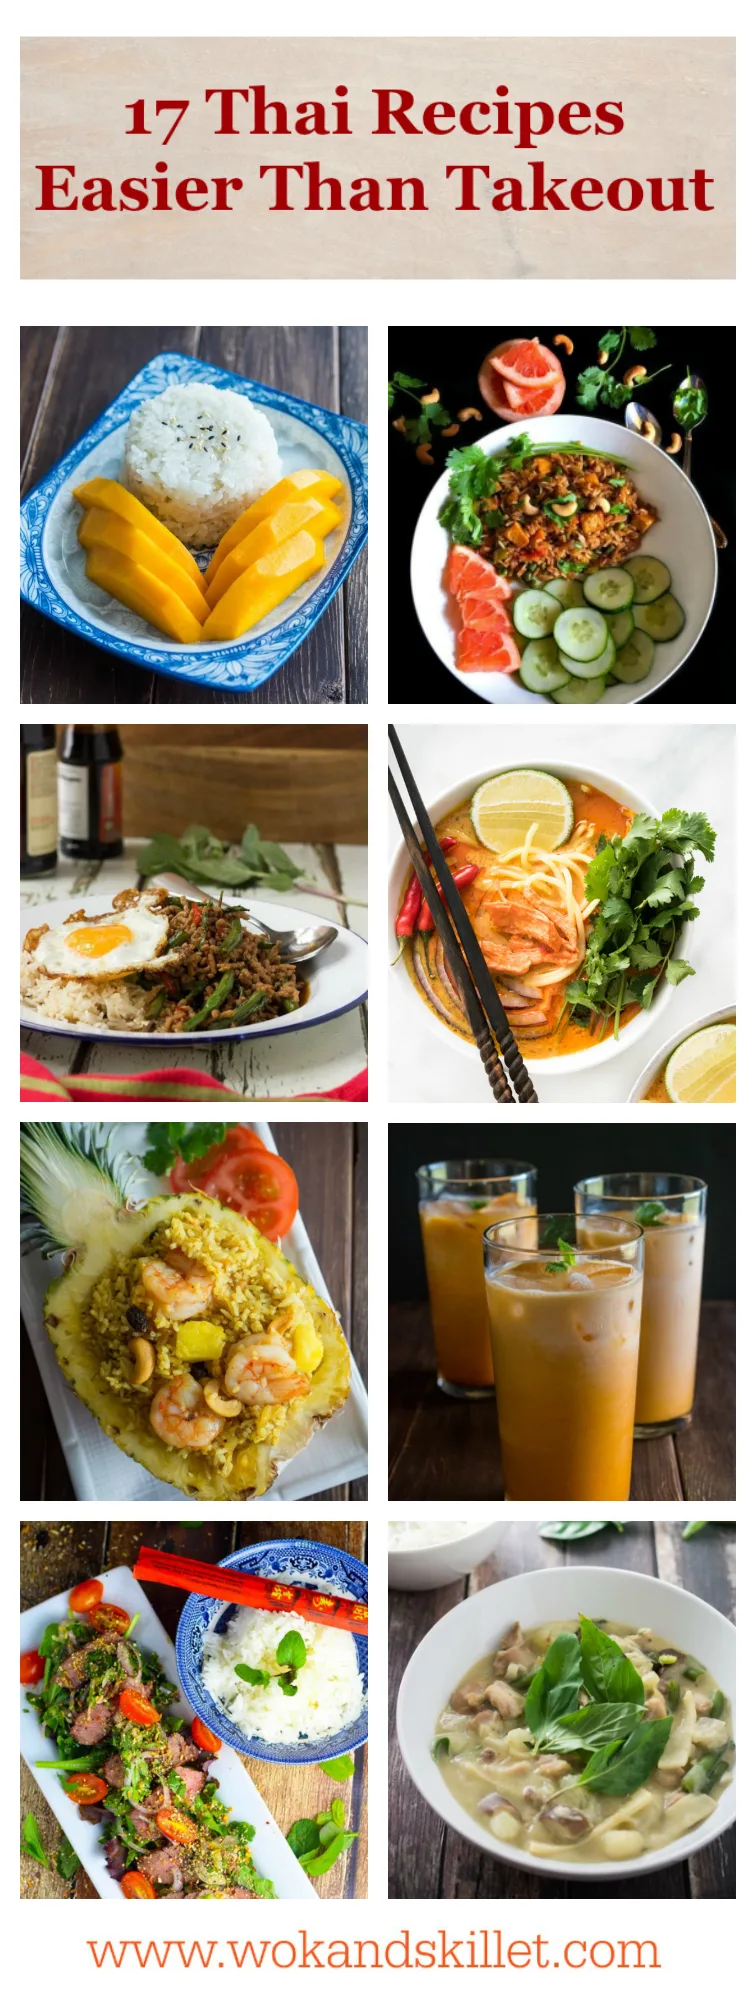 17 Easy Thai Recipes That Will Make You Re-think Takeout! A round-up of delicious and super-easy Thai food recipes you can make for dinner tonight! 